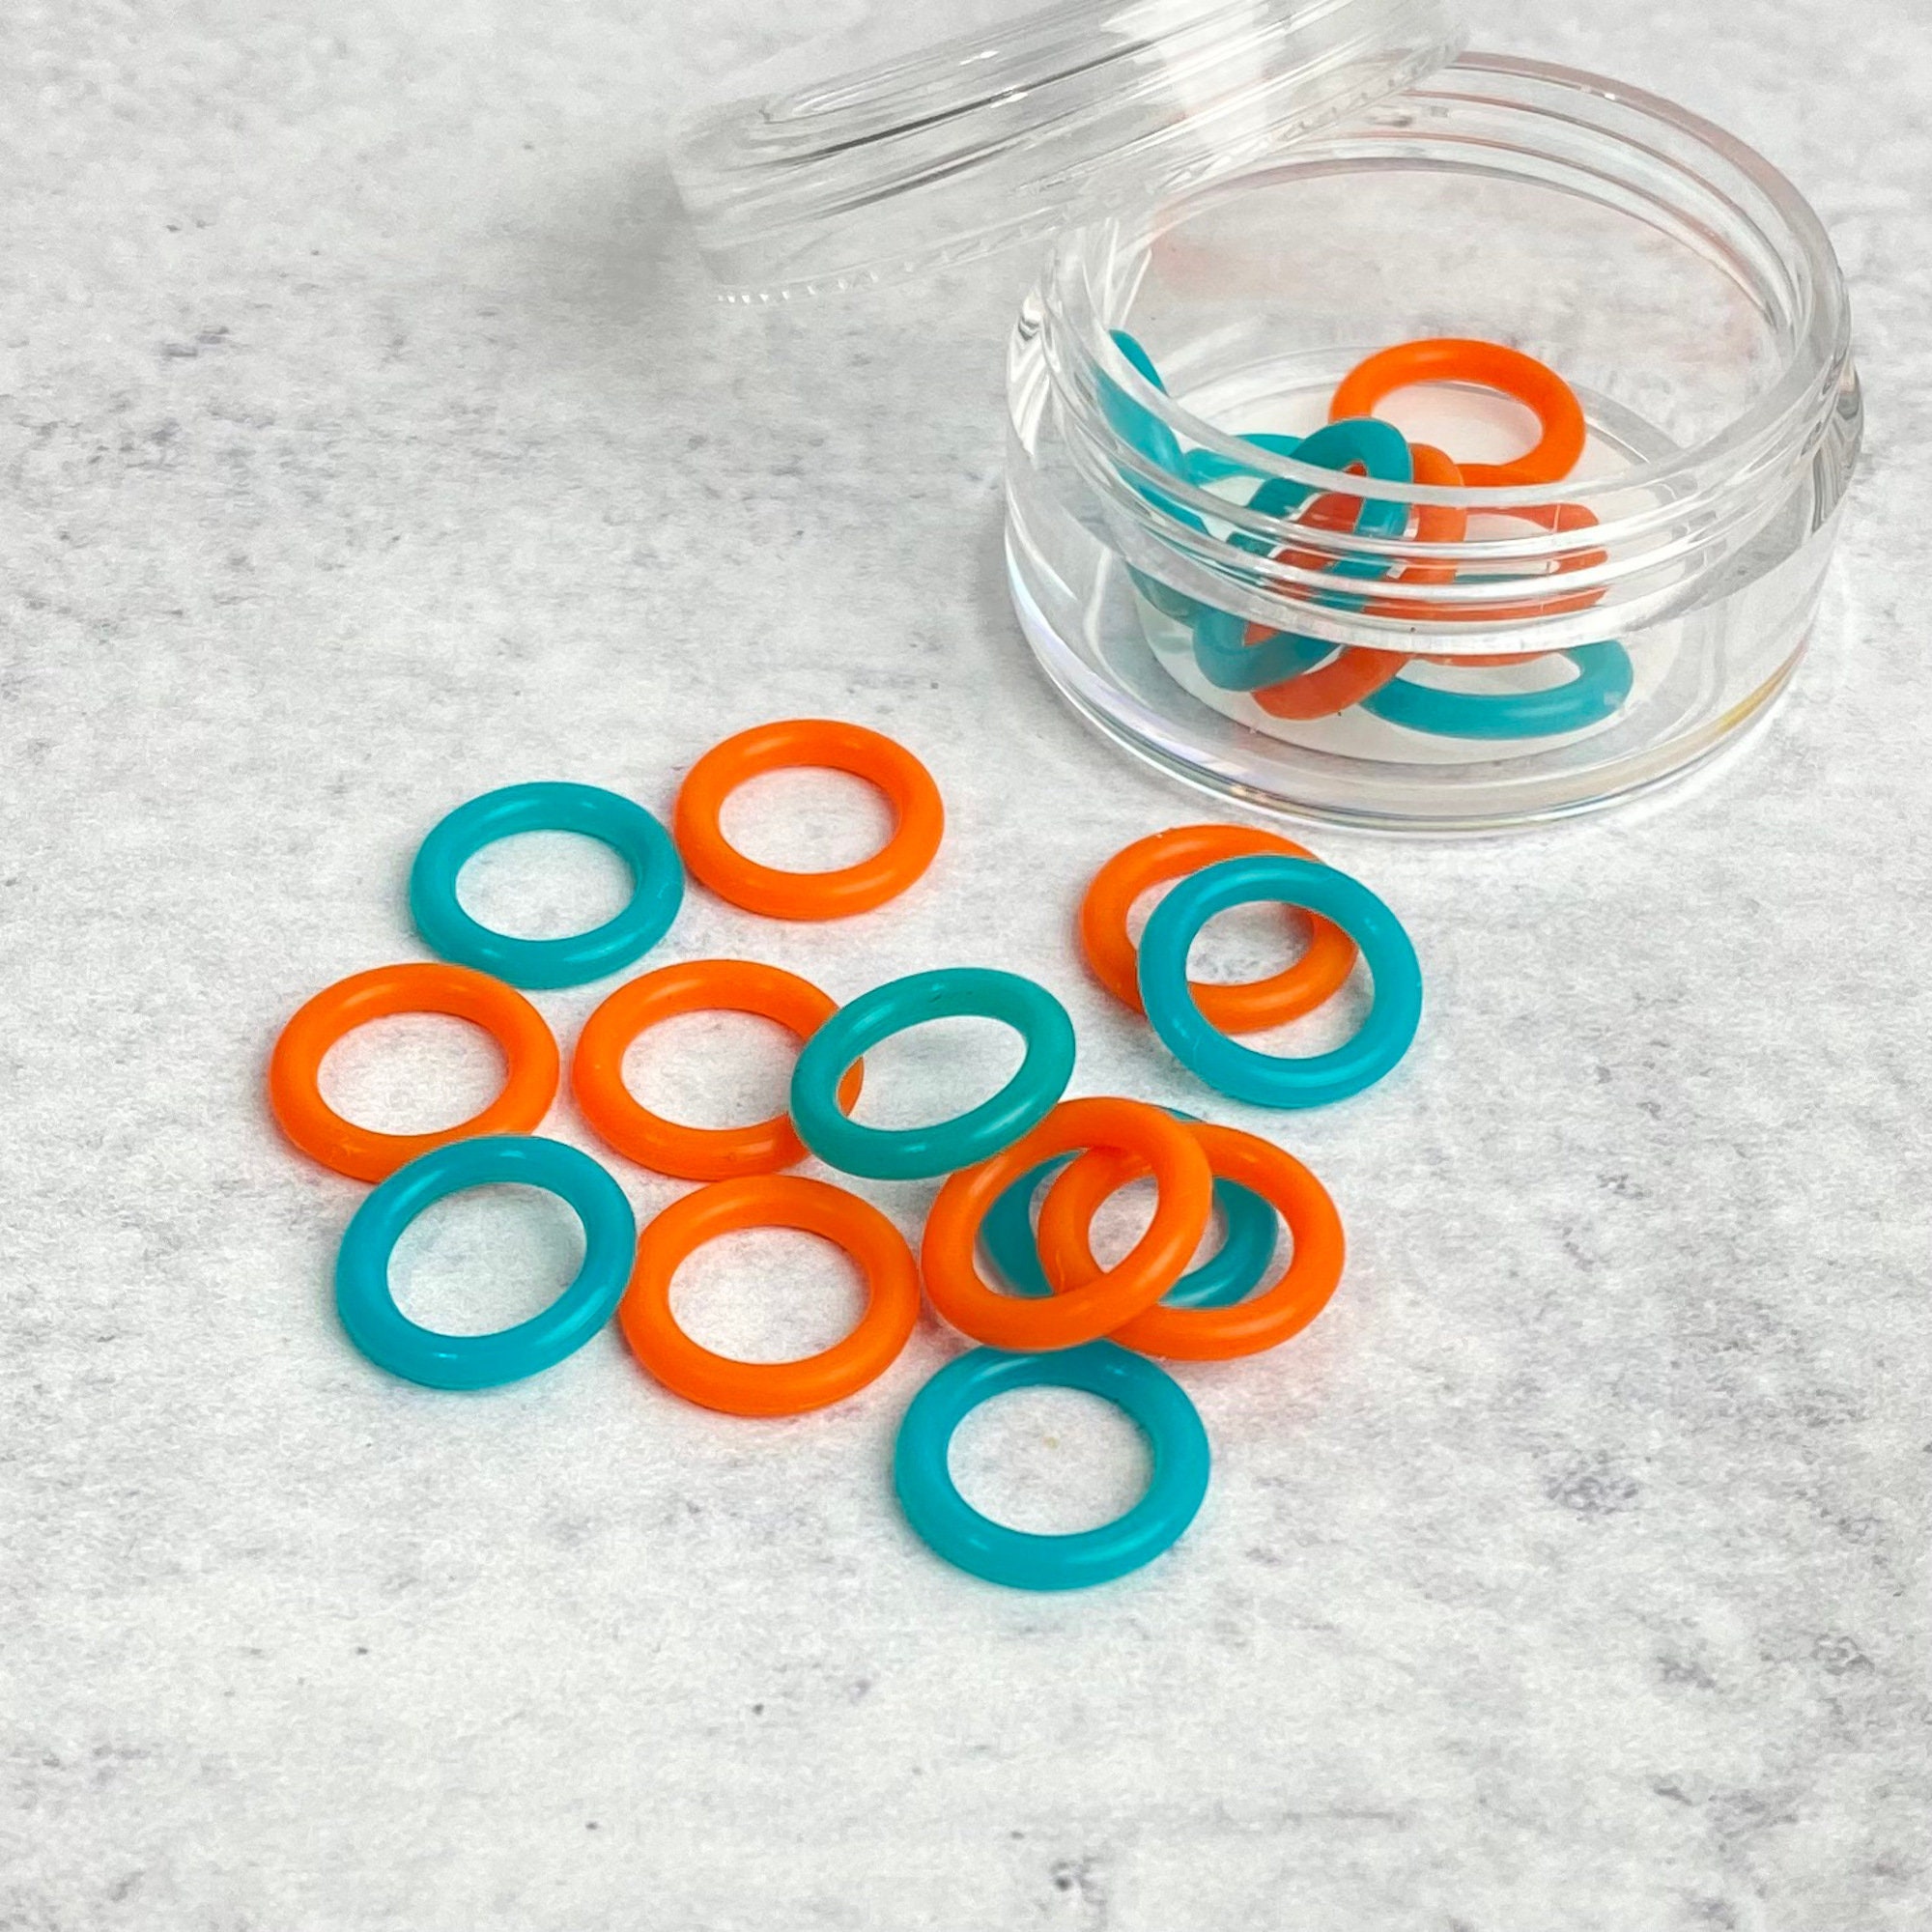 Silicone Ring Stitch Markers Teal and Orange Set of 20 Knitting -   Norway